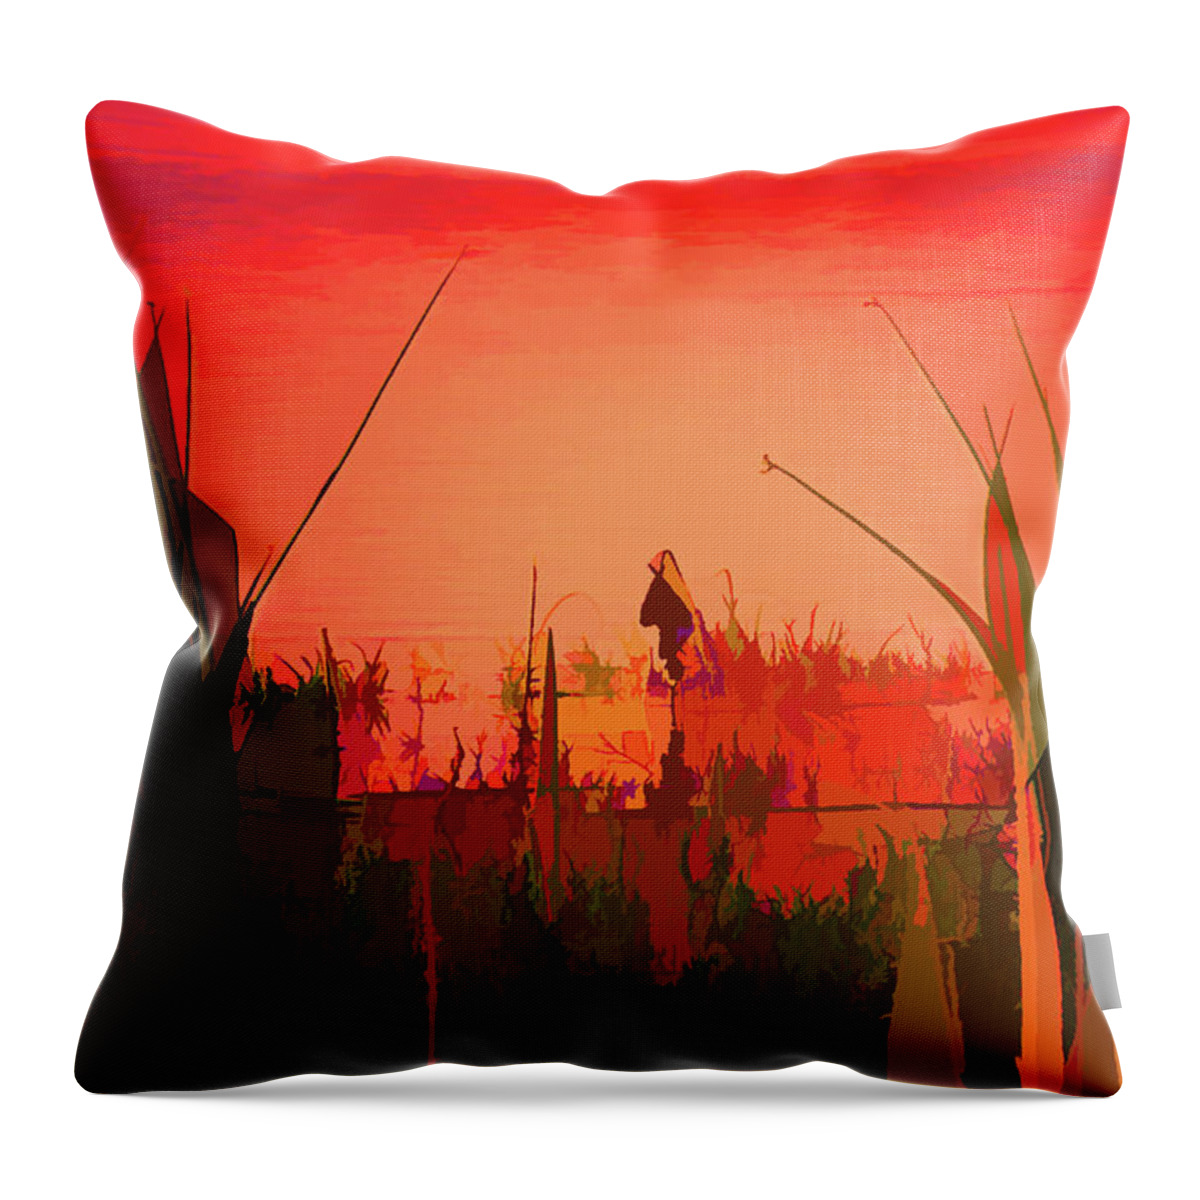 Swamp Throw Pillow featuring the mixed media Artistic Swamp by Rosalie Scanlon